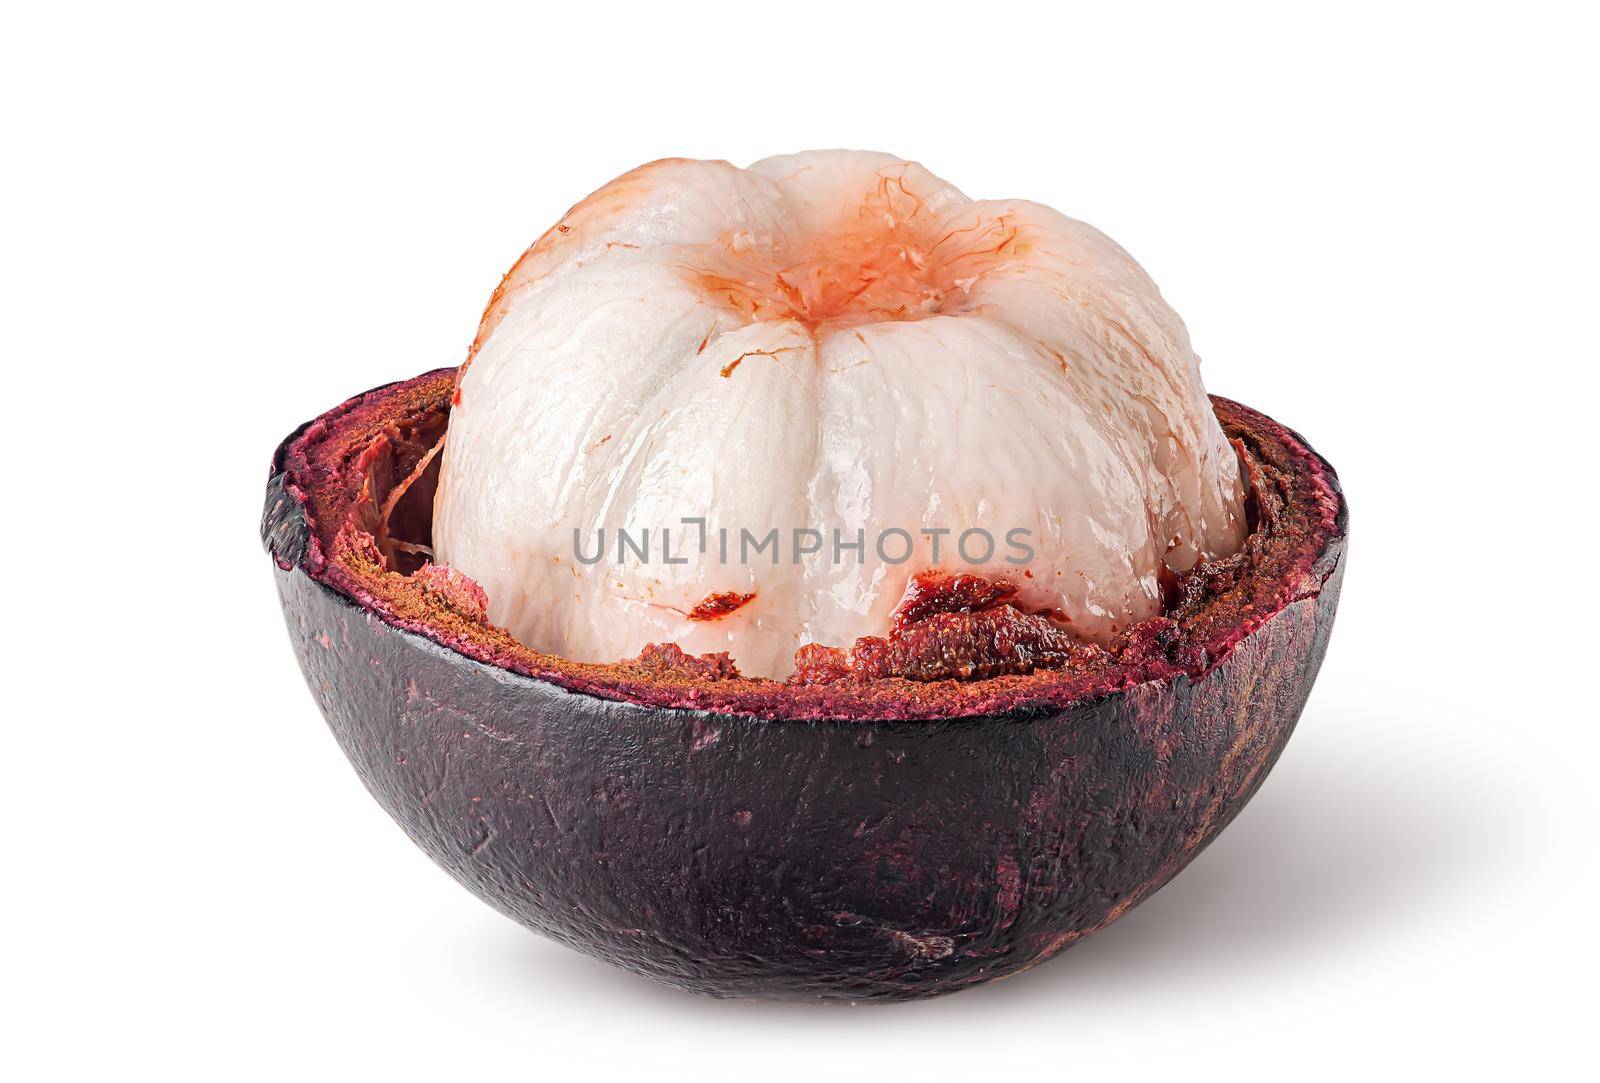 Ripe opened mangosteen front view isolated on white background